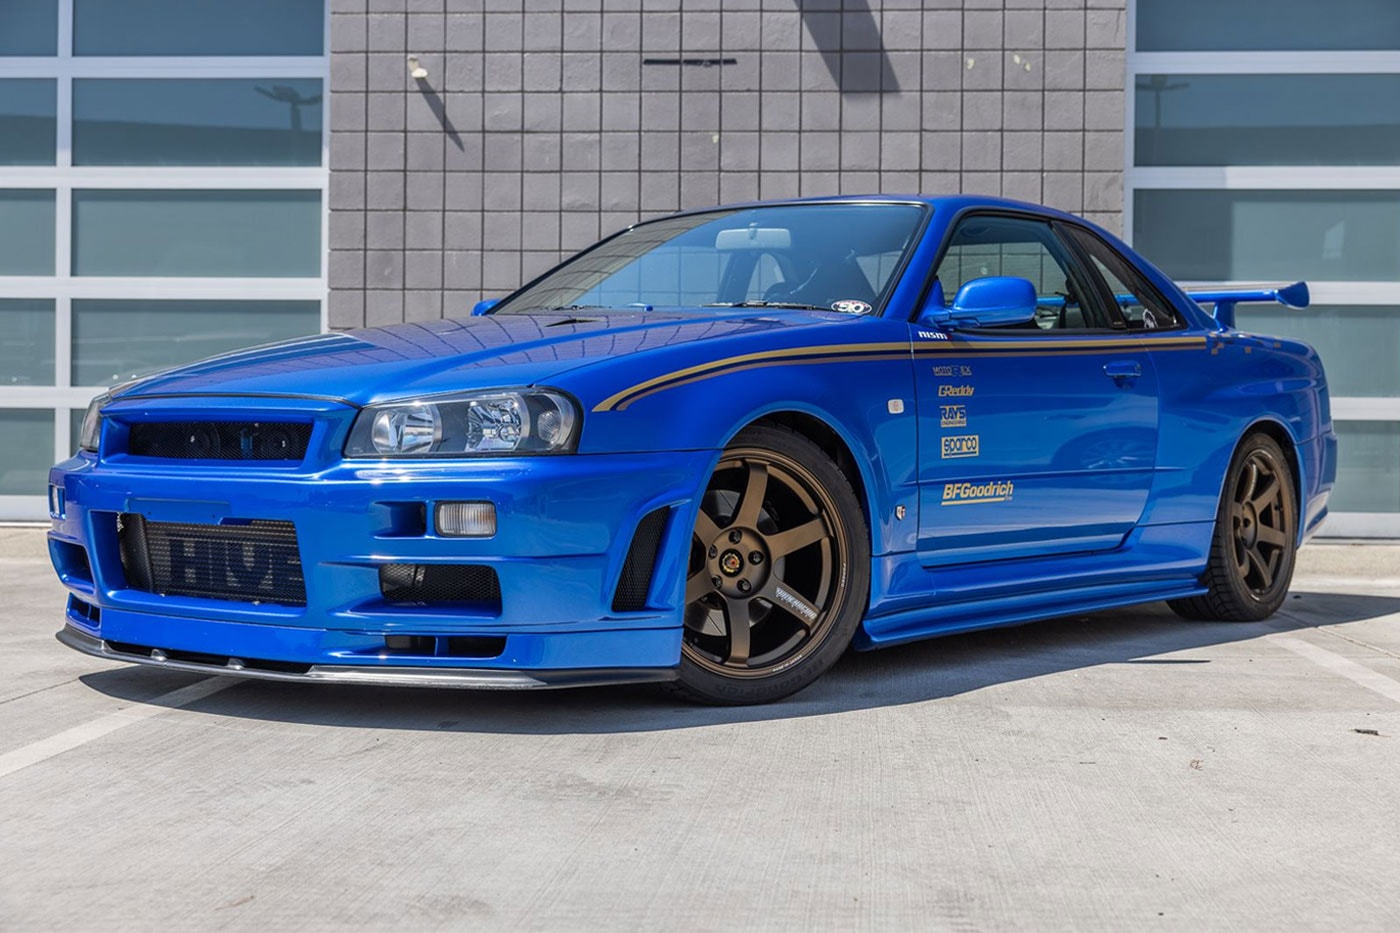 Paul Walker R34 Skyline from Fast & Furious 4 is heads to auction